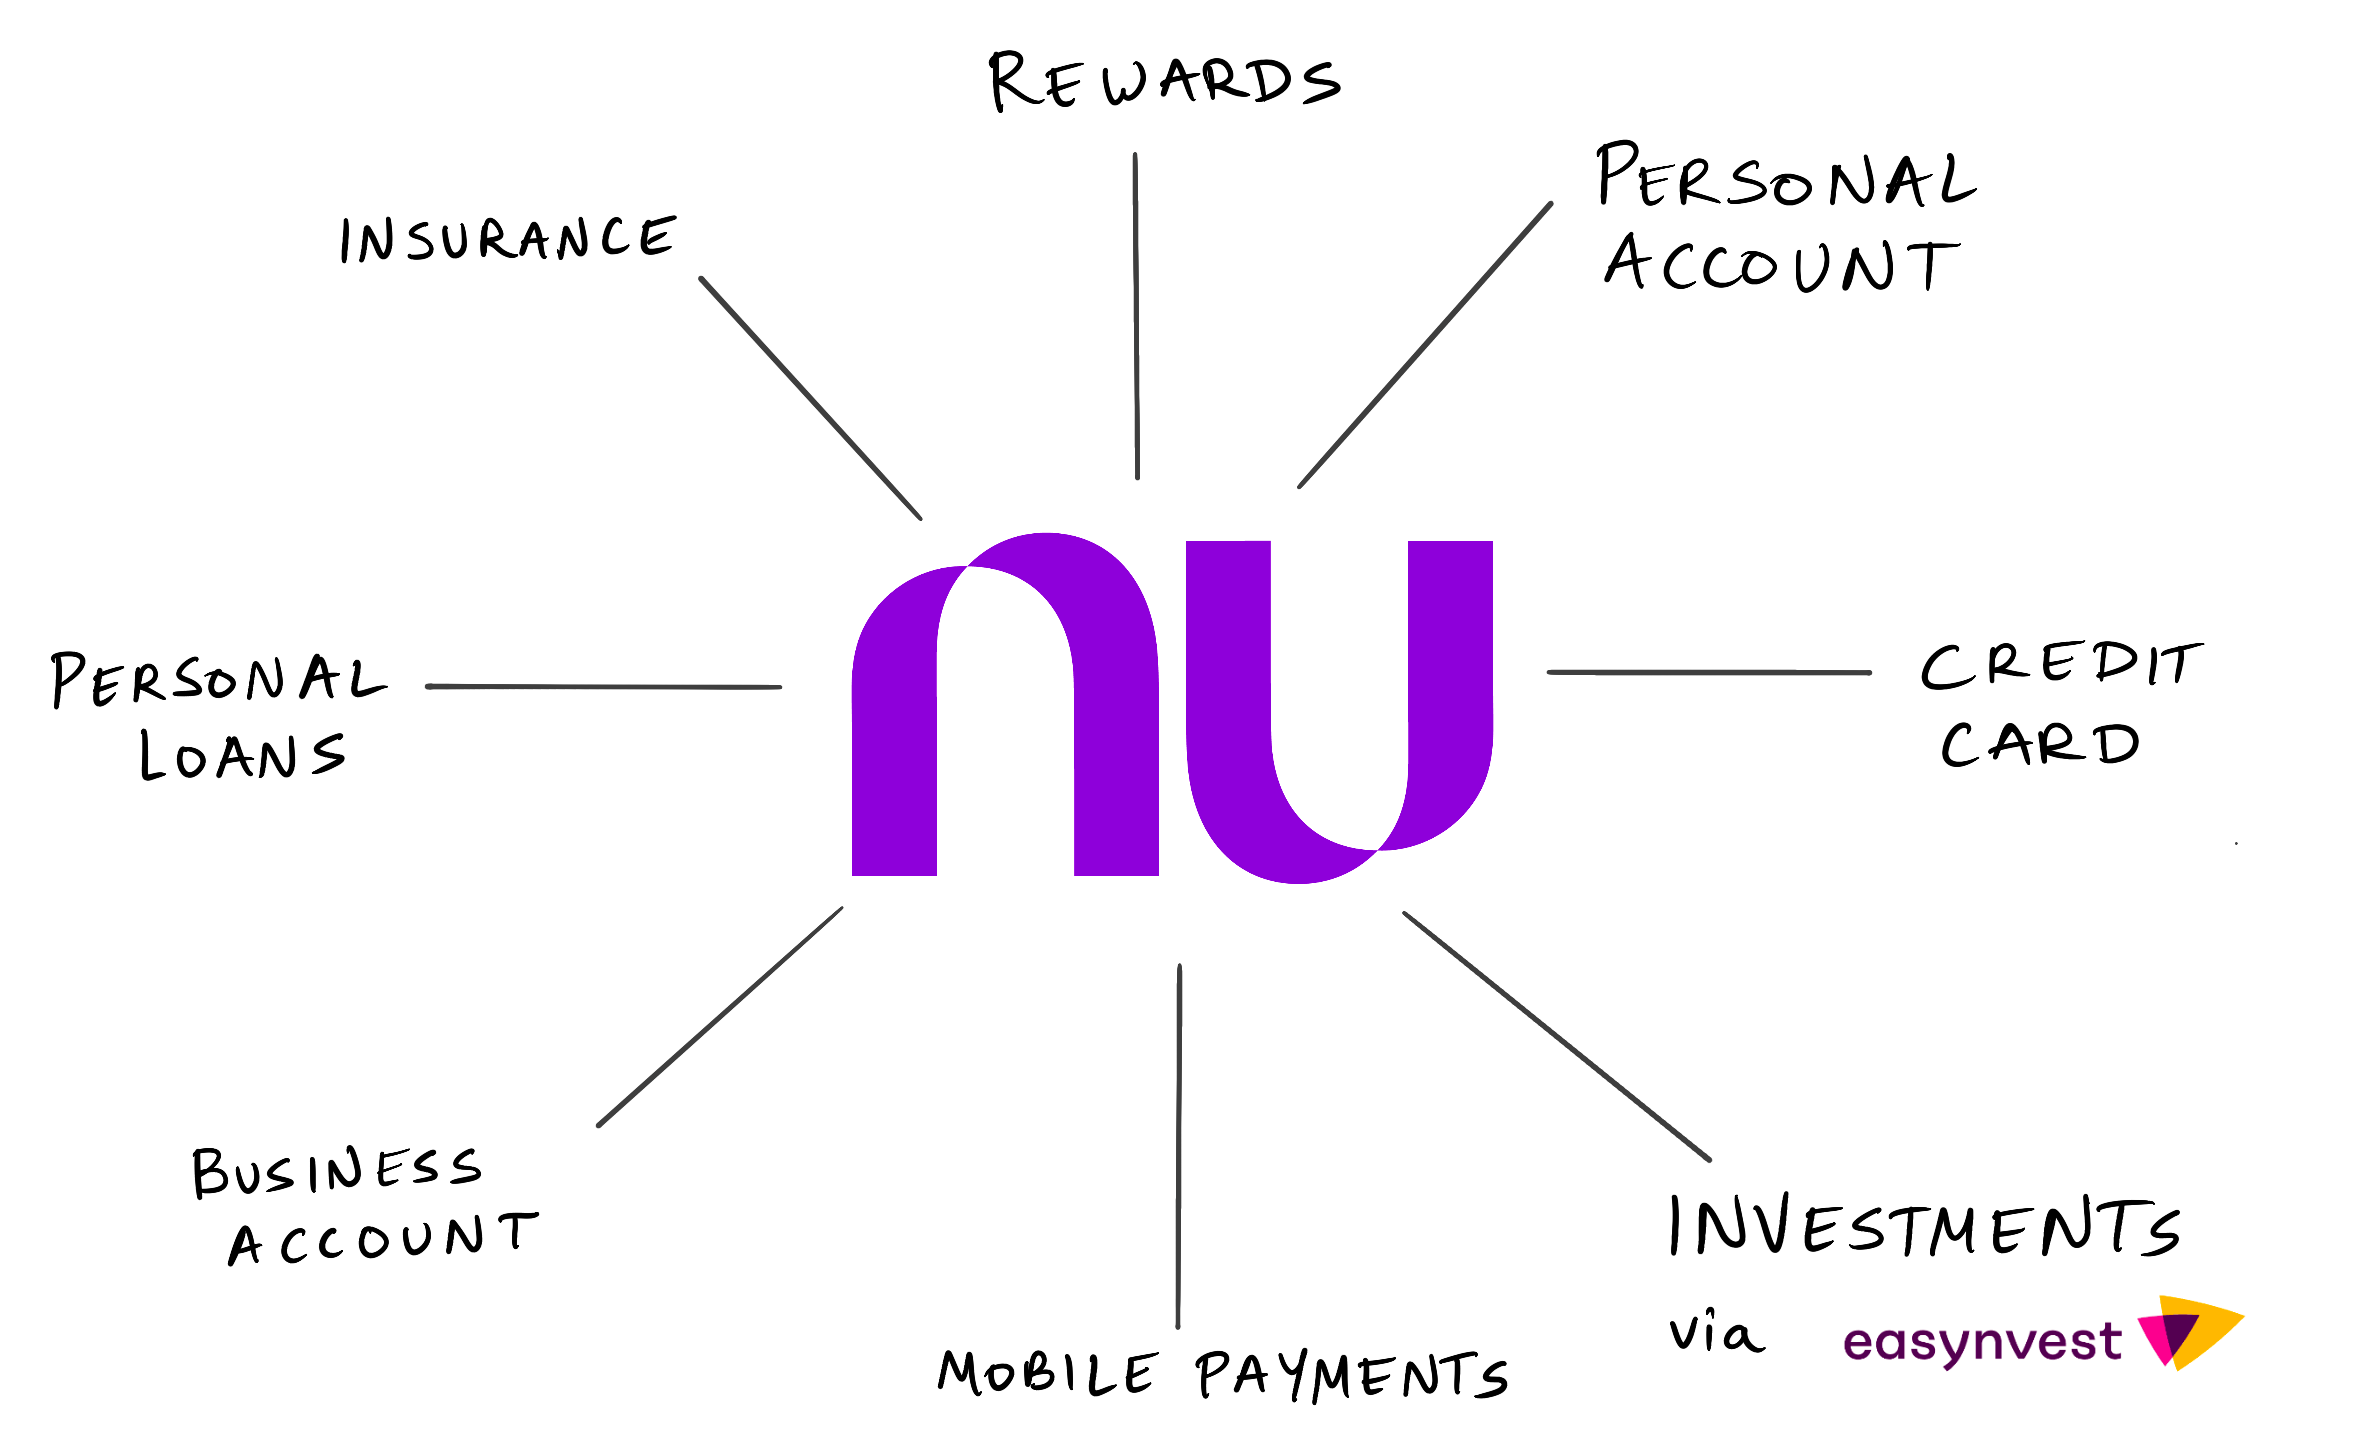 Nubank: Finding simplicity and resiliency for fintech at global scale